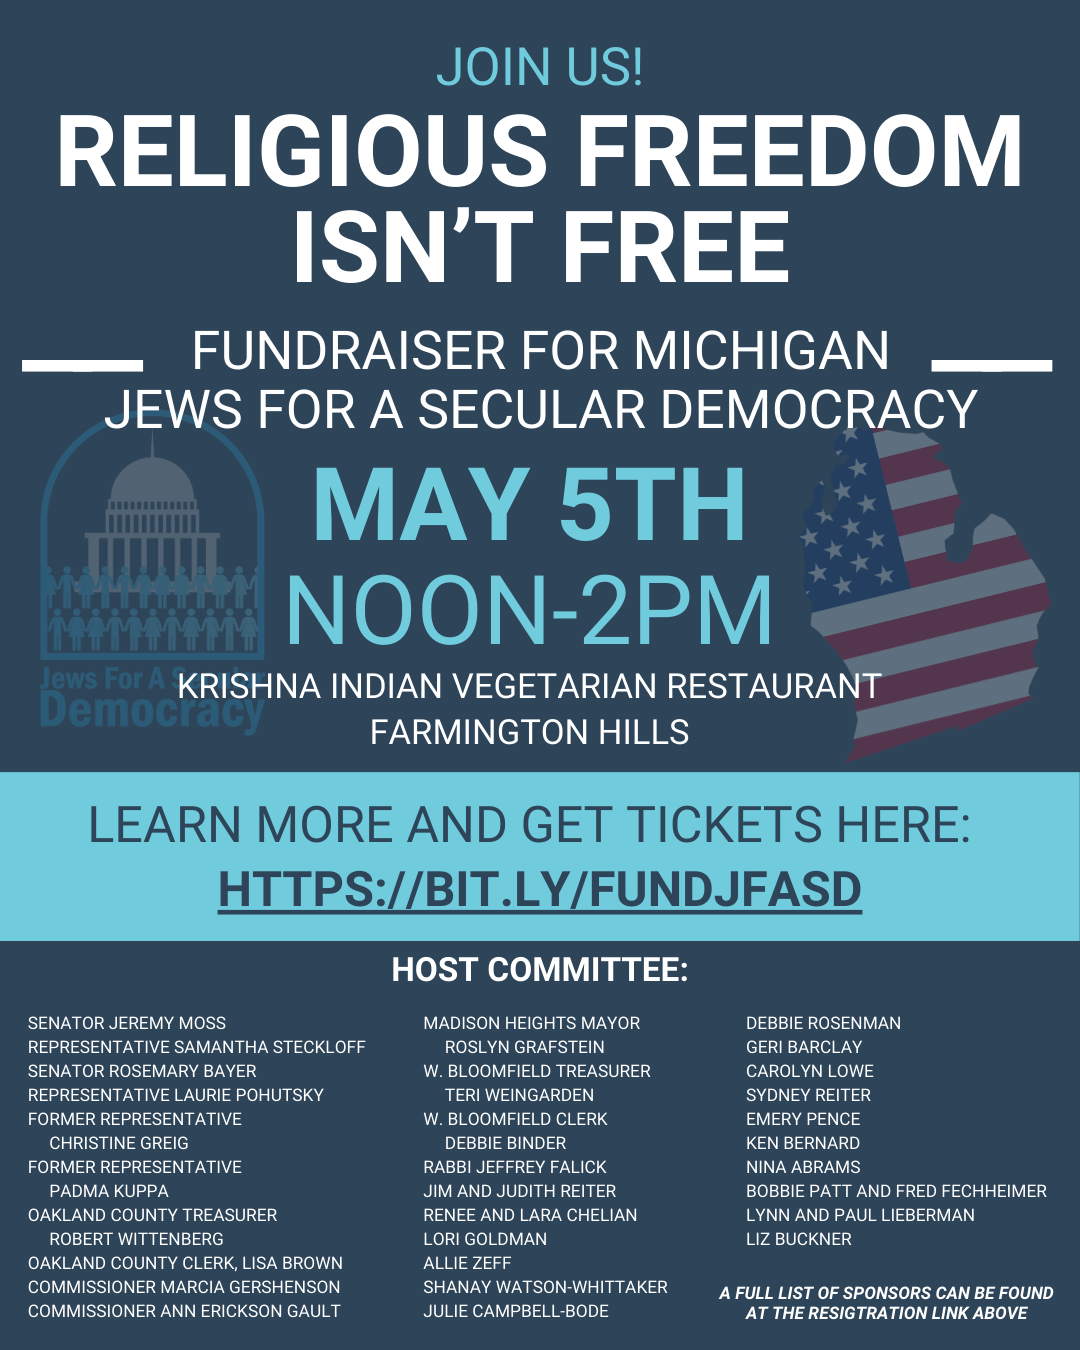 Religious Freedom Isn’t Free! Fundraiser for Jews for a Secular Democracy